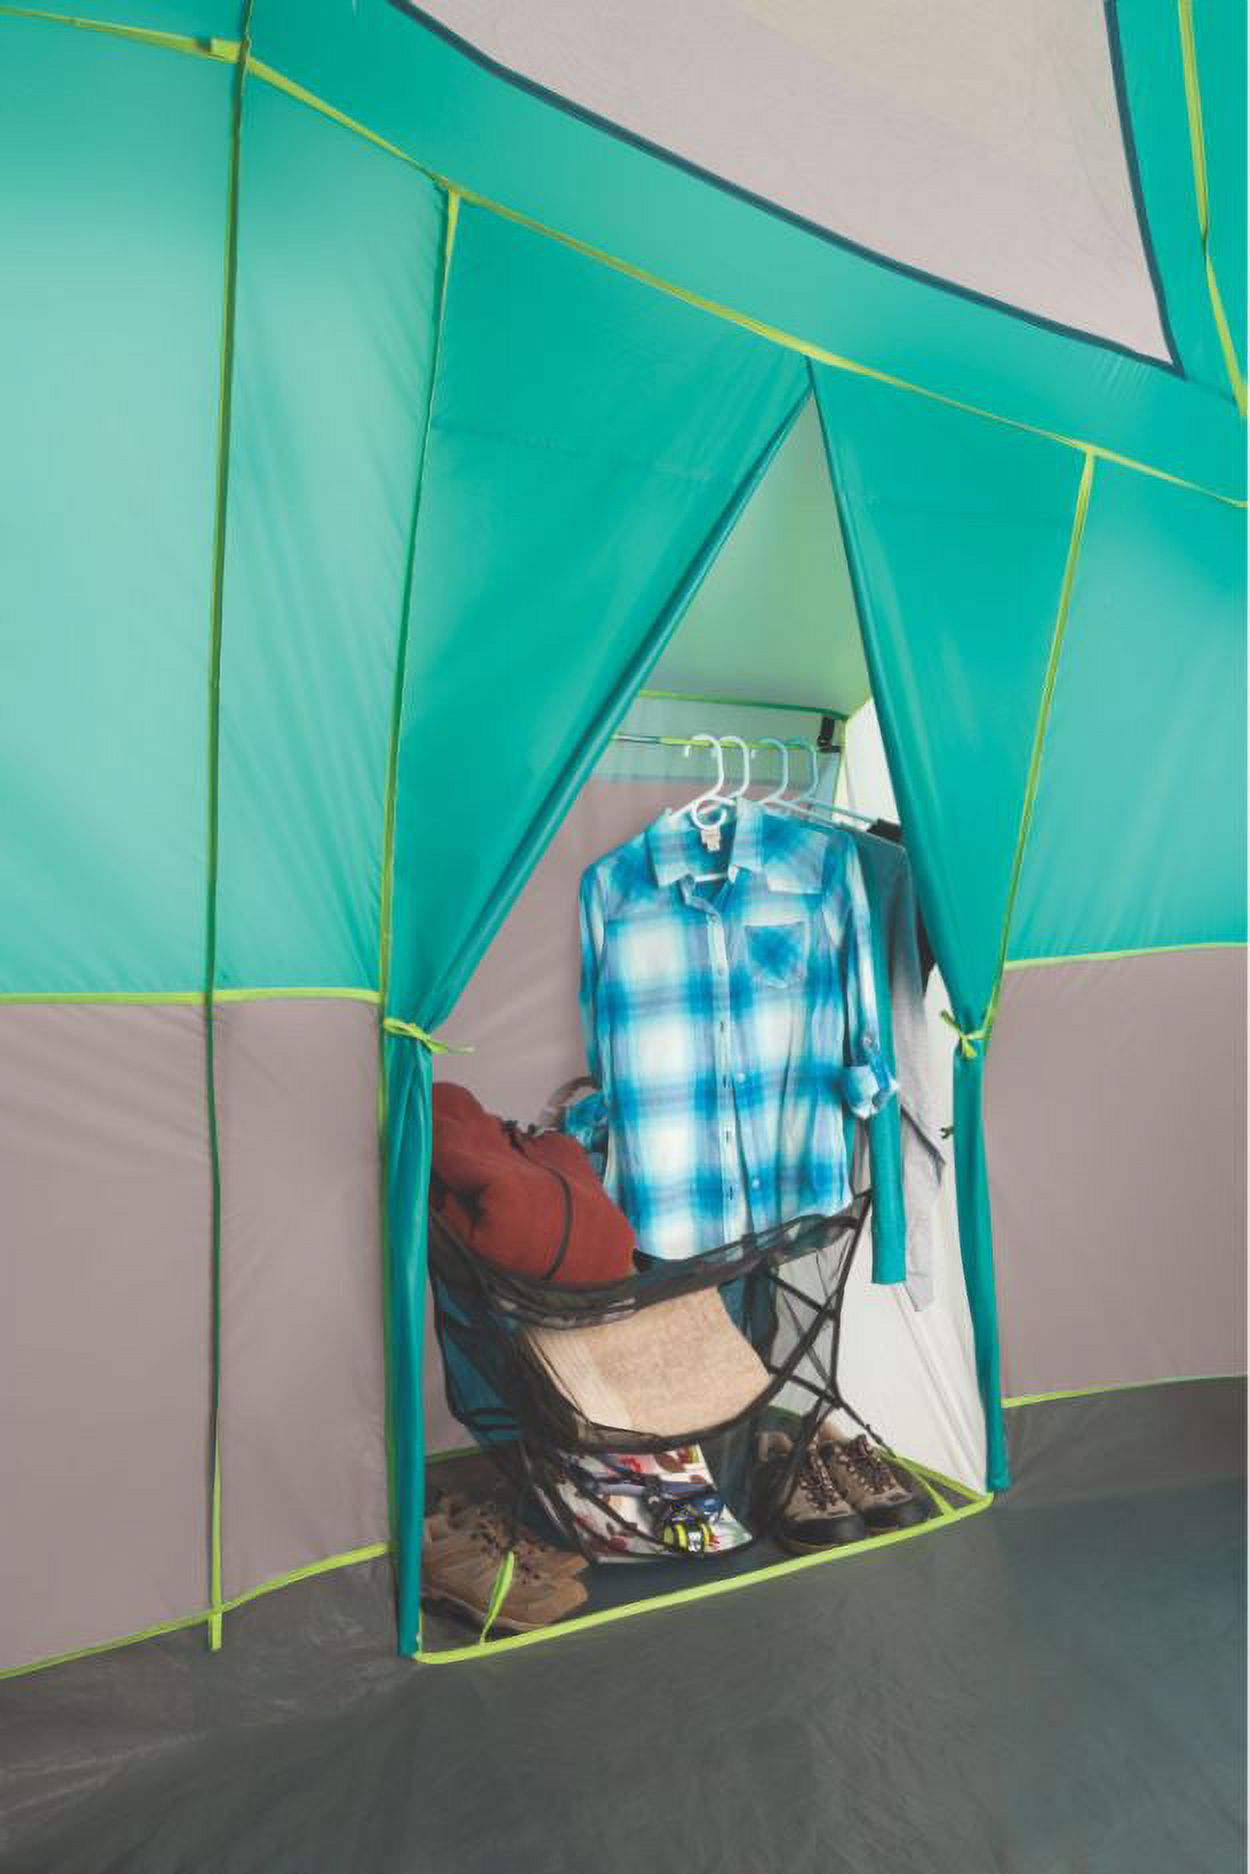 Coleman Tenaya Lake 8 Person Lighted Fast Pitch Cabin Tent, 1 Room, Teal - image 5 of 5